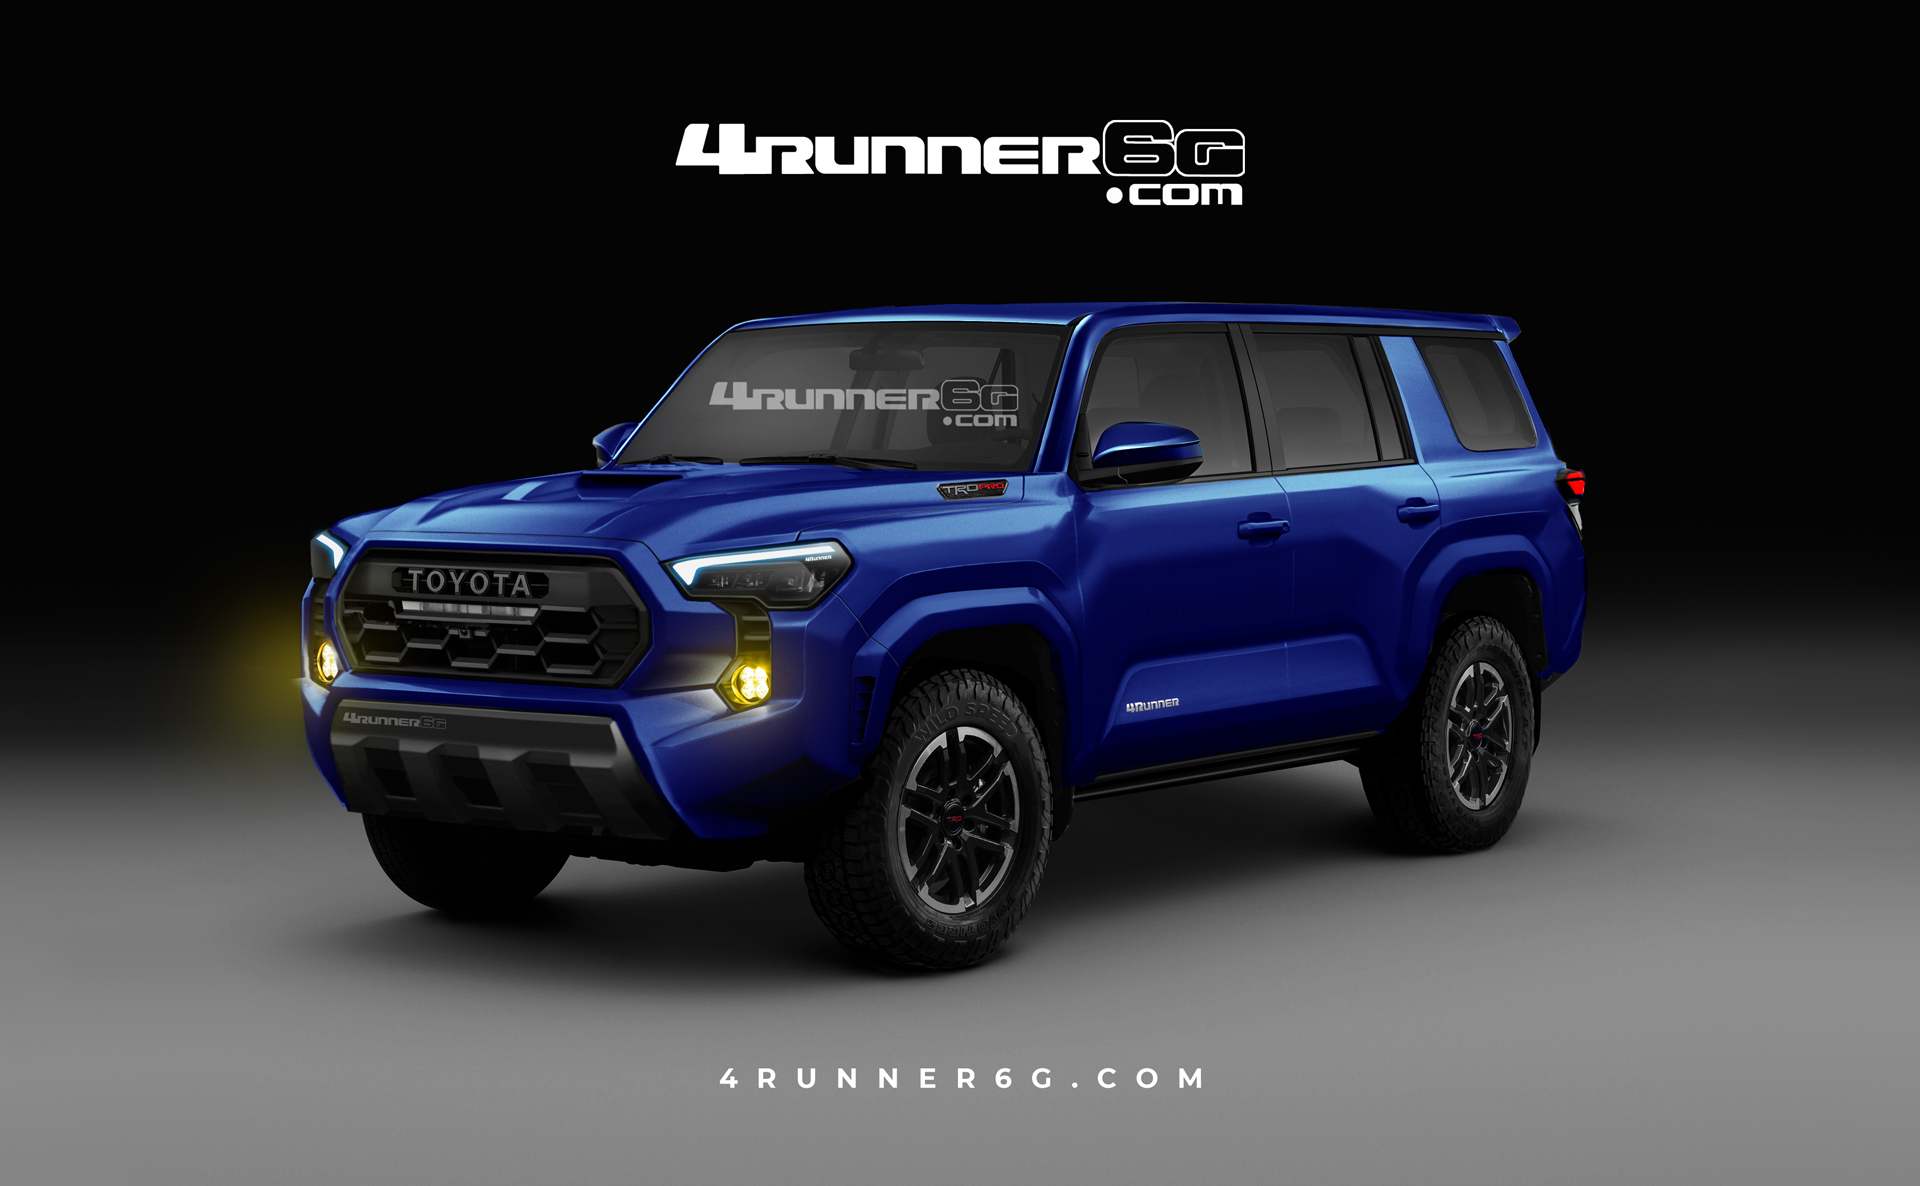 2025 Toyota 4runner 2025 4Runner (6th Gen) News, Specs, Engines, Release Date, Production Date & Preview Renderings -- Insider Info (as of 7/30/23) 2025 Toyota-4Runner-Front-S-Blue-crush